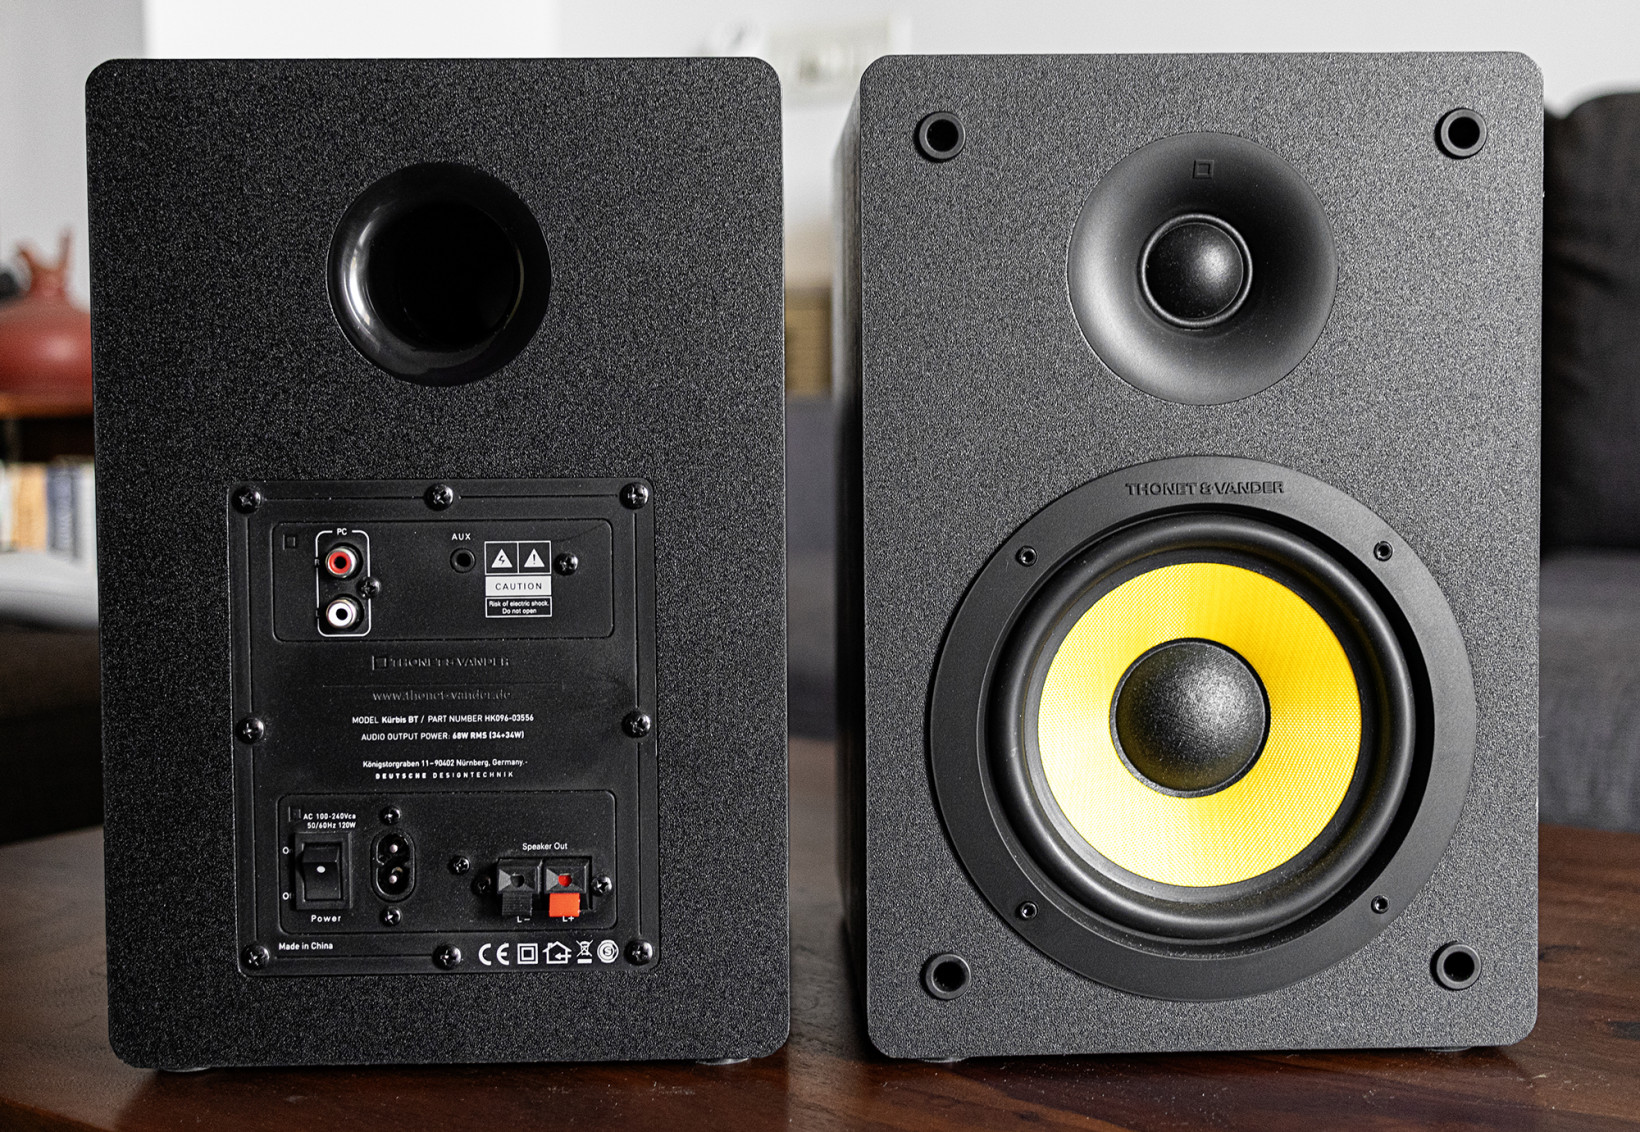 The Kubris speakers have their inputs and power switch on the back, which isn't ideal